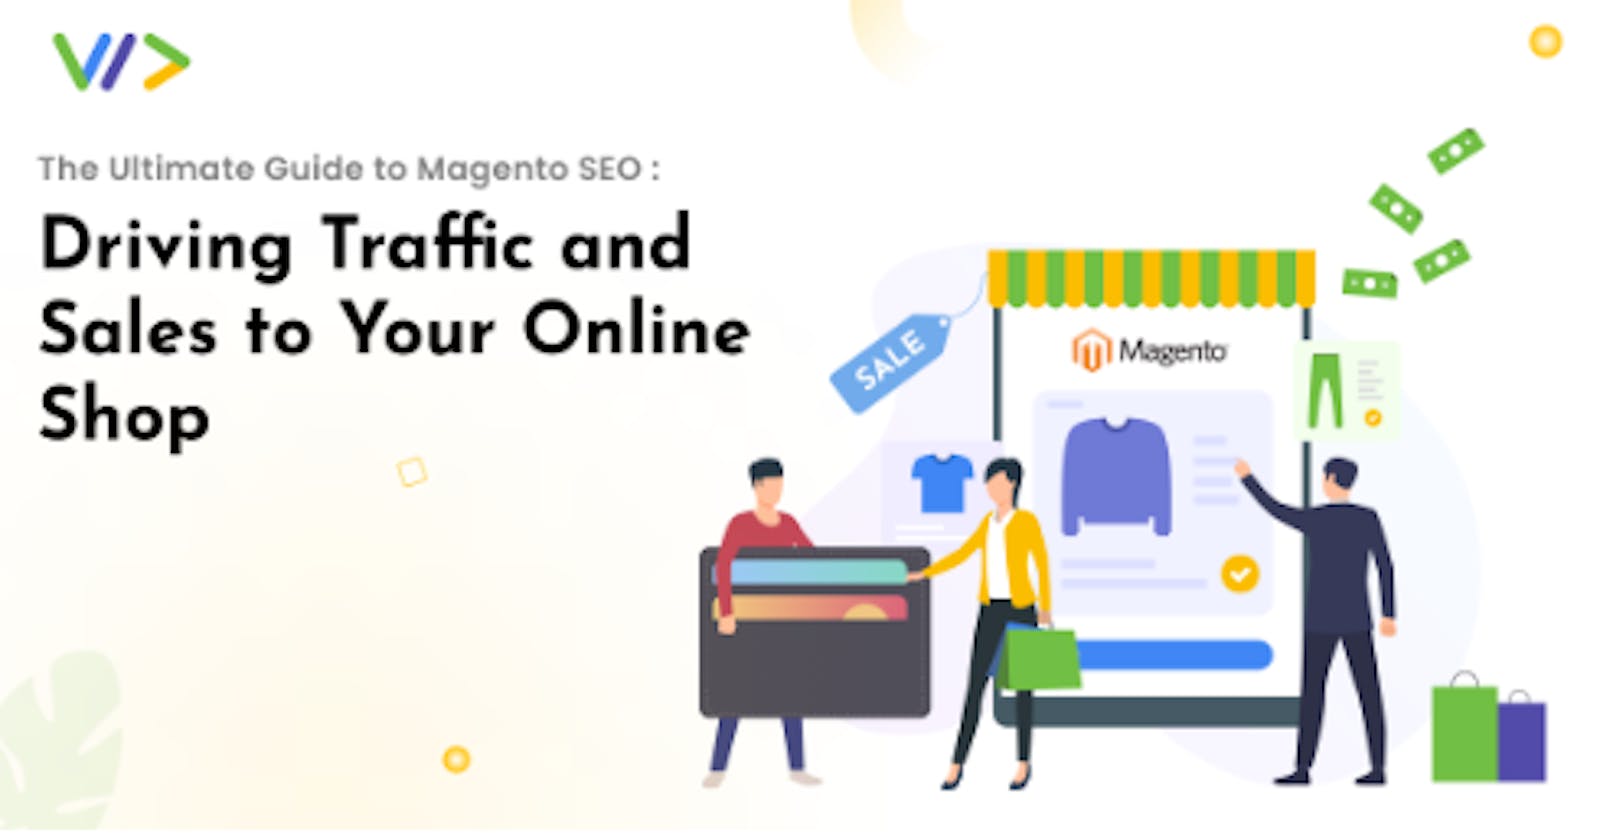 The Ultimate Guide to Magento SEO: Driving Traffic and Sales to Your Online Shop